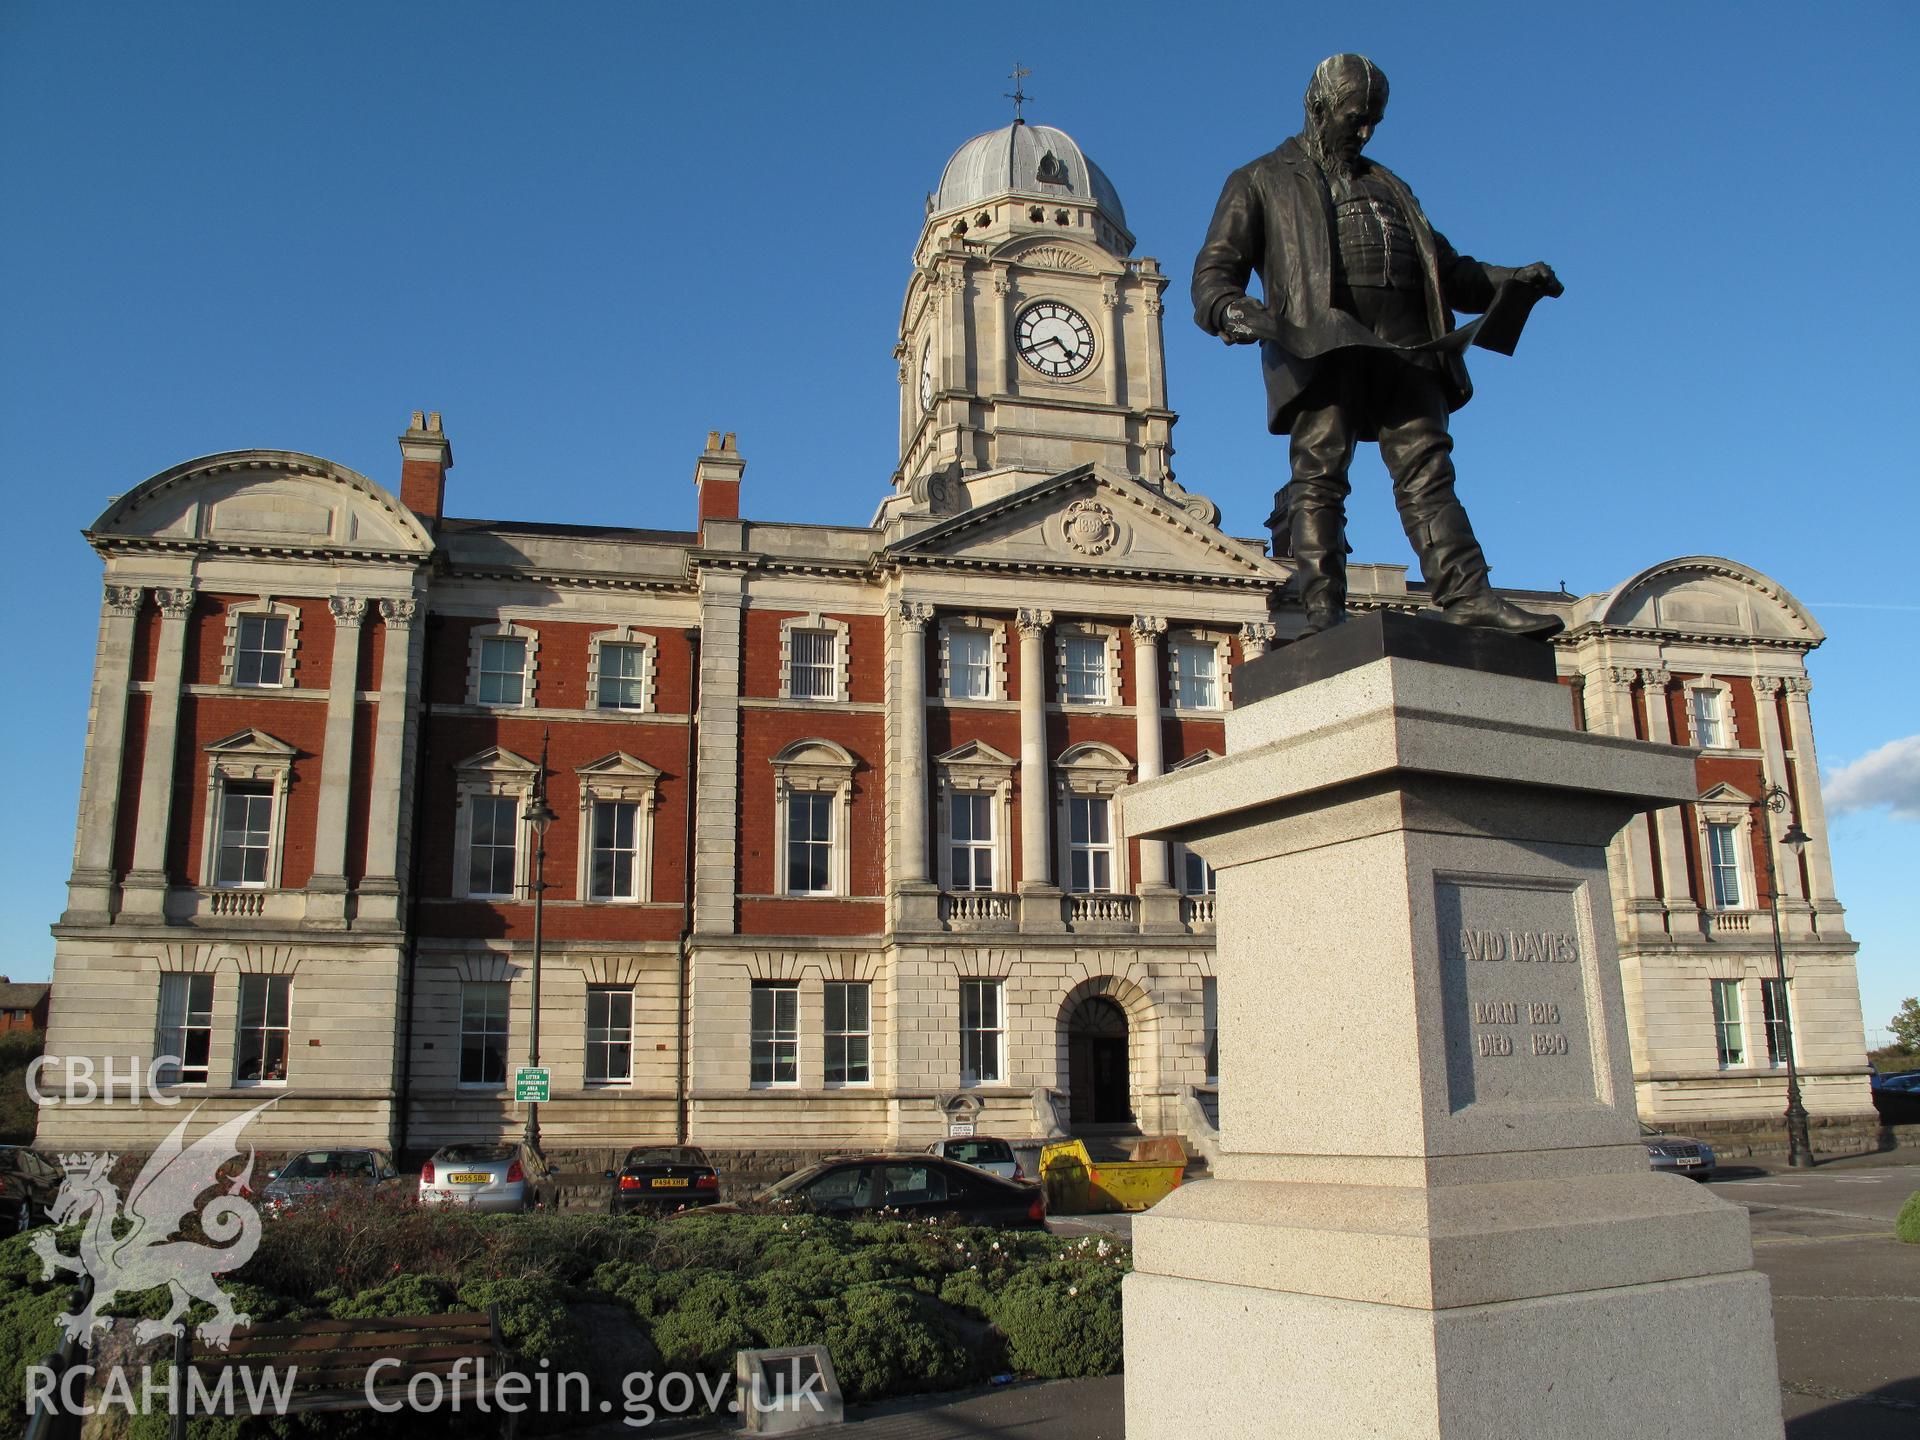 View of Barry Docks Board Office and statue of David Davies from the south, taken by Brian Malaws on 20 October 2010.